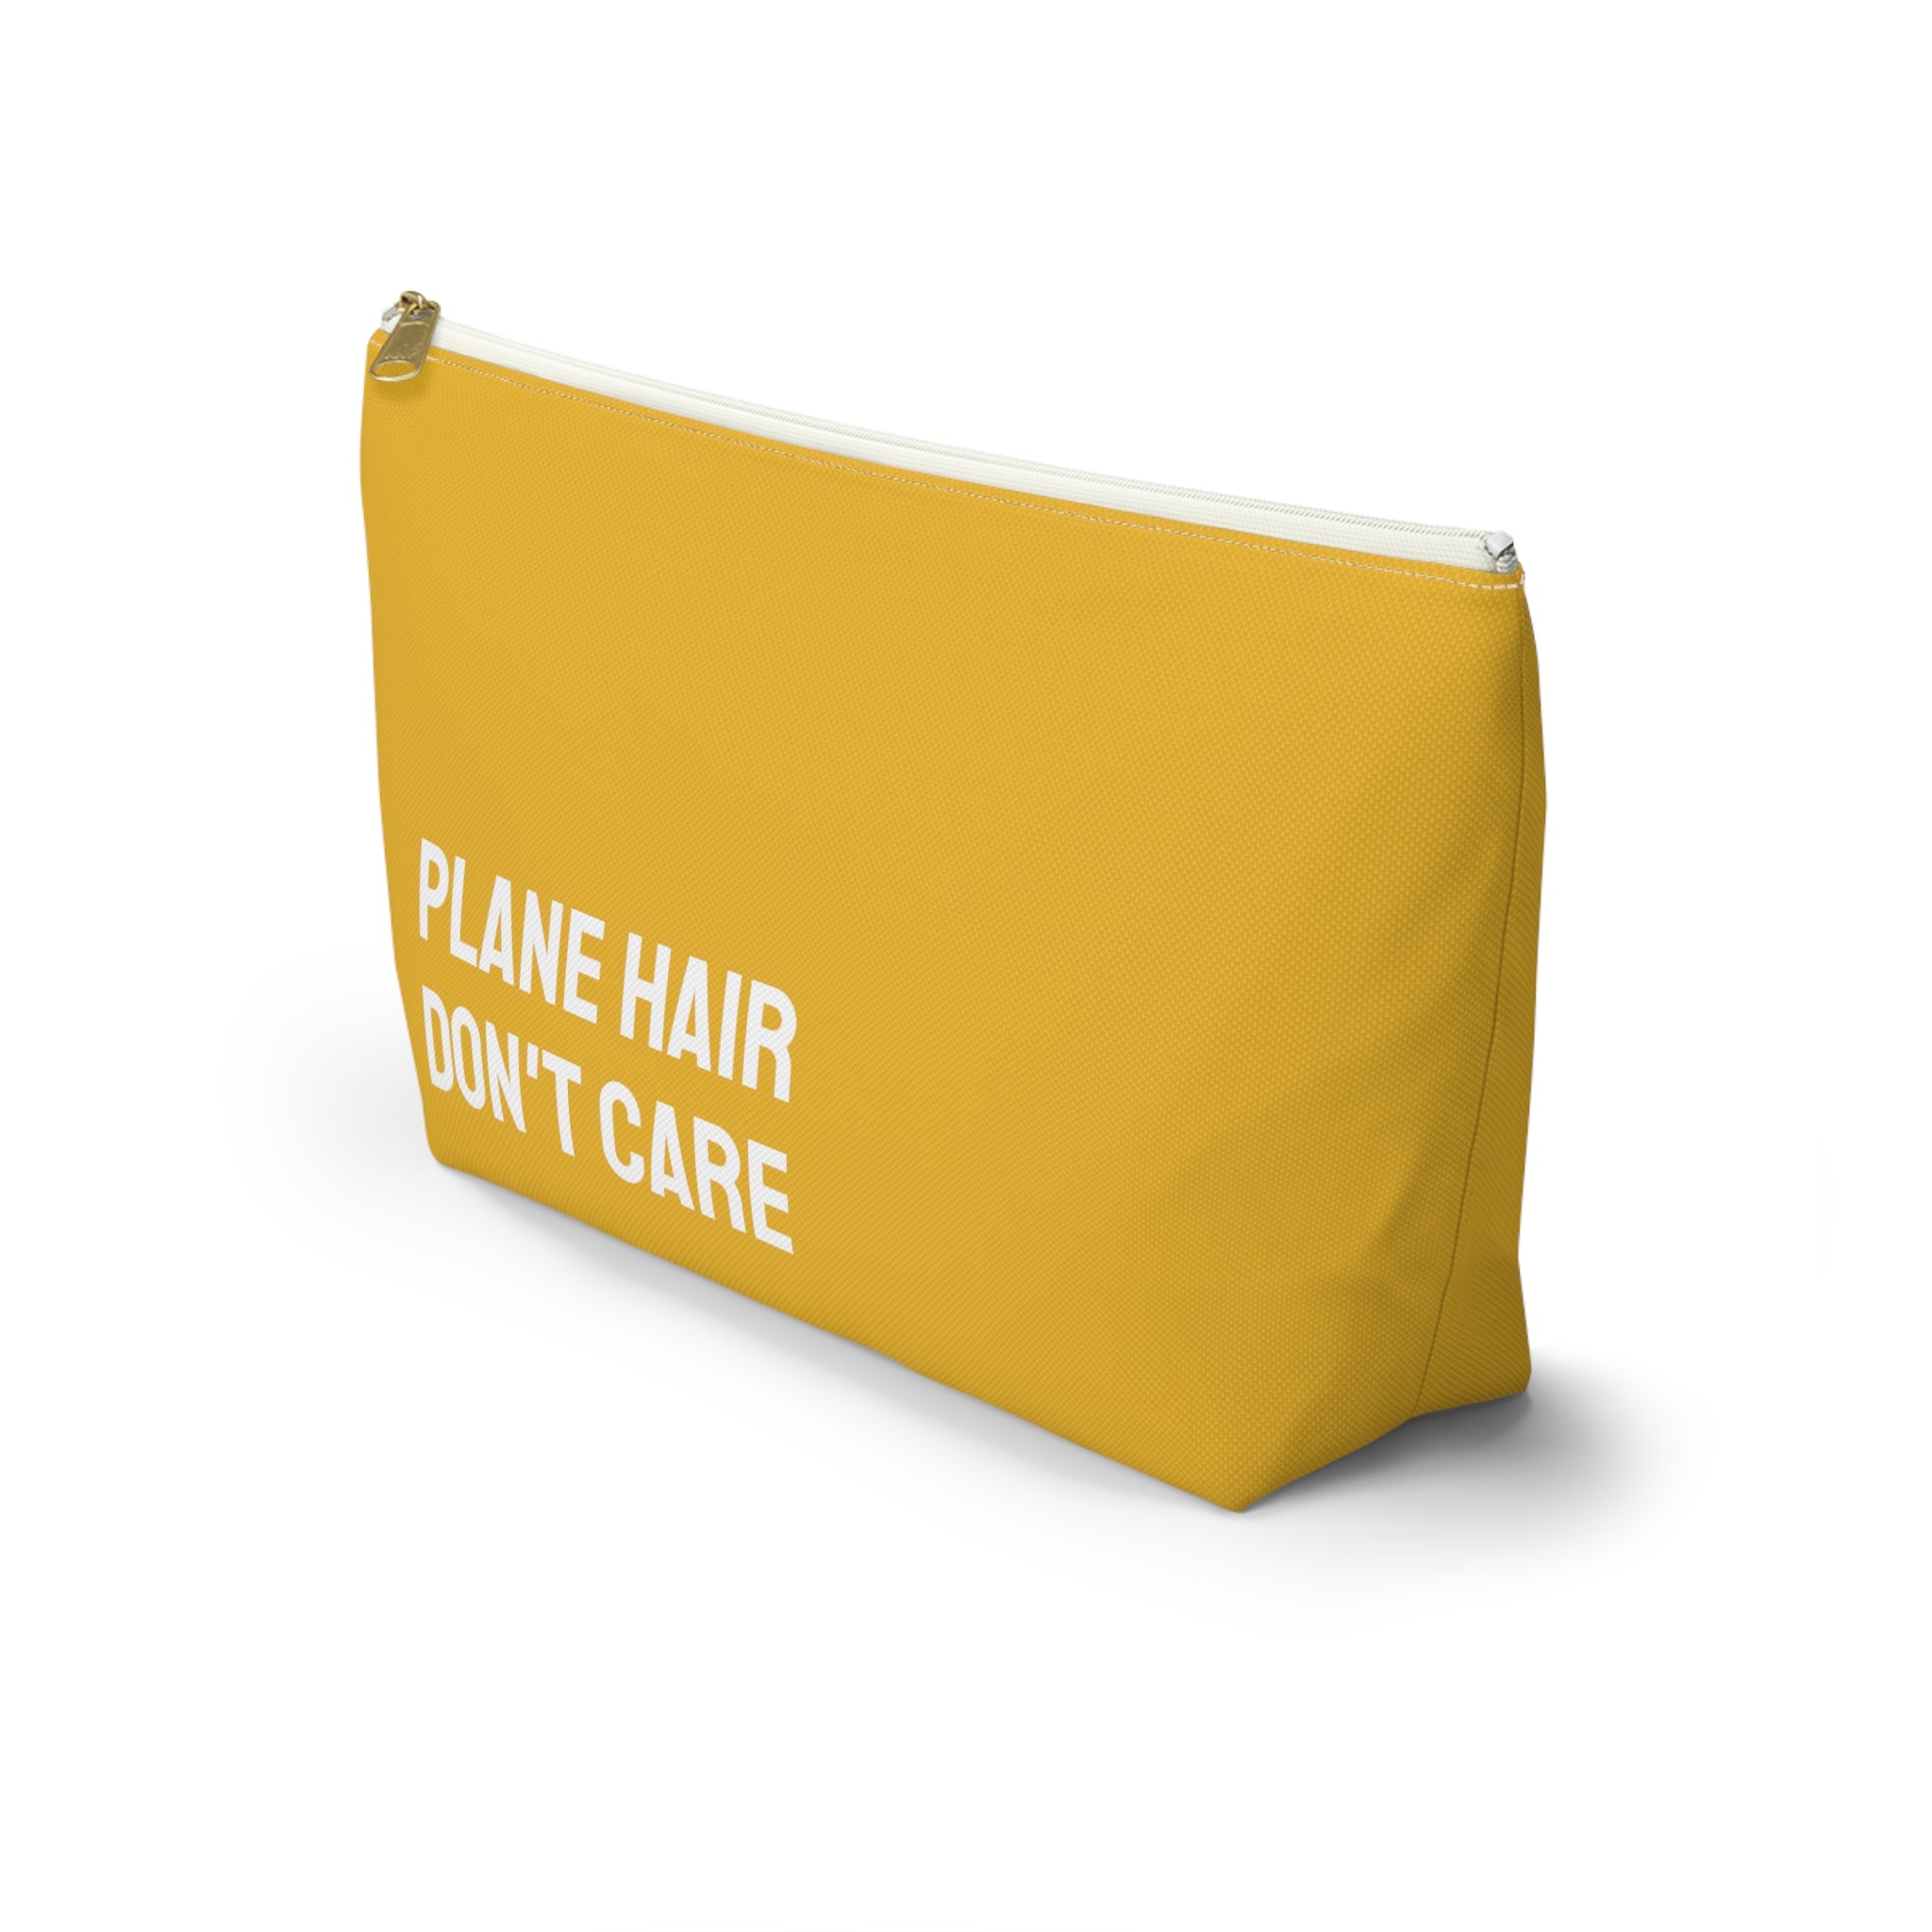 Plane hair don't care Pouch (Yellow)